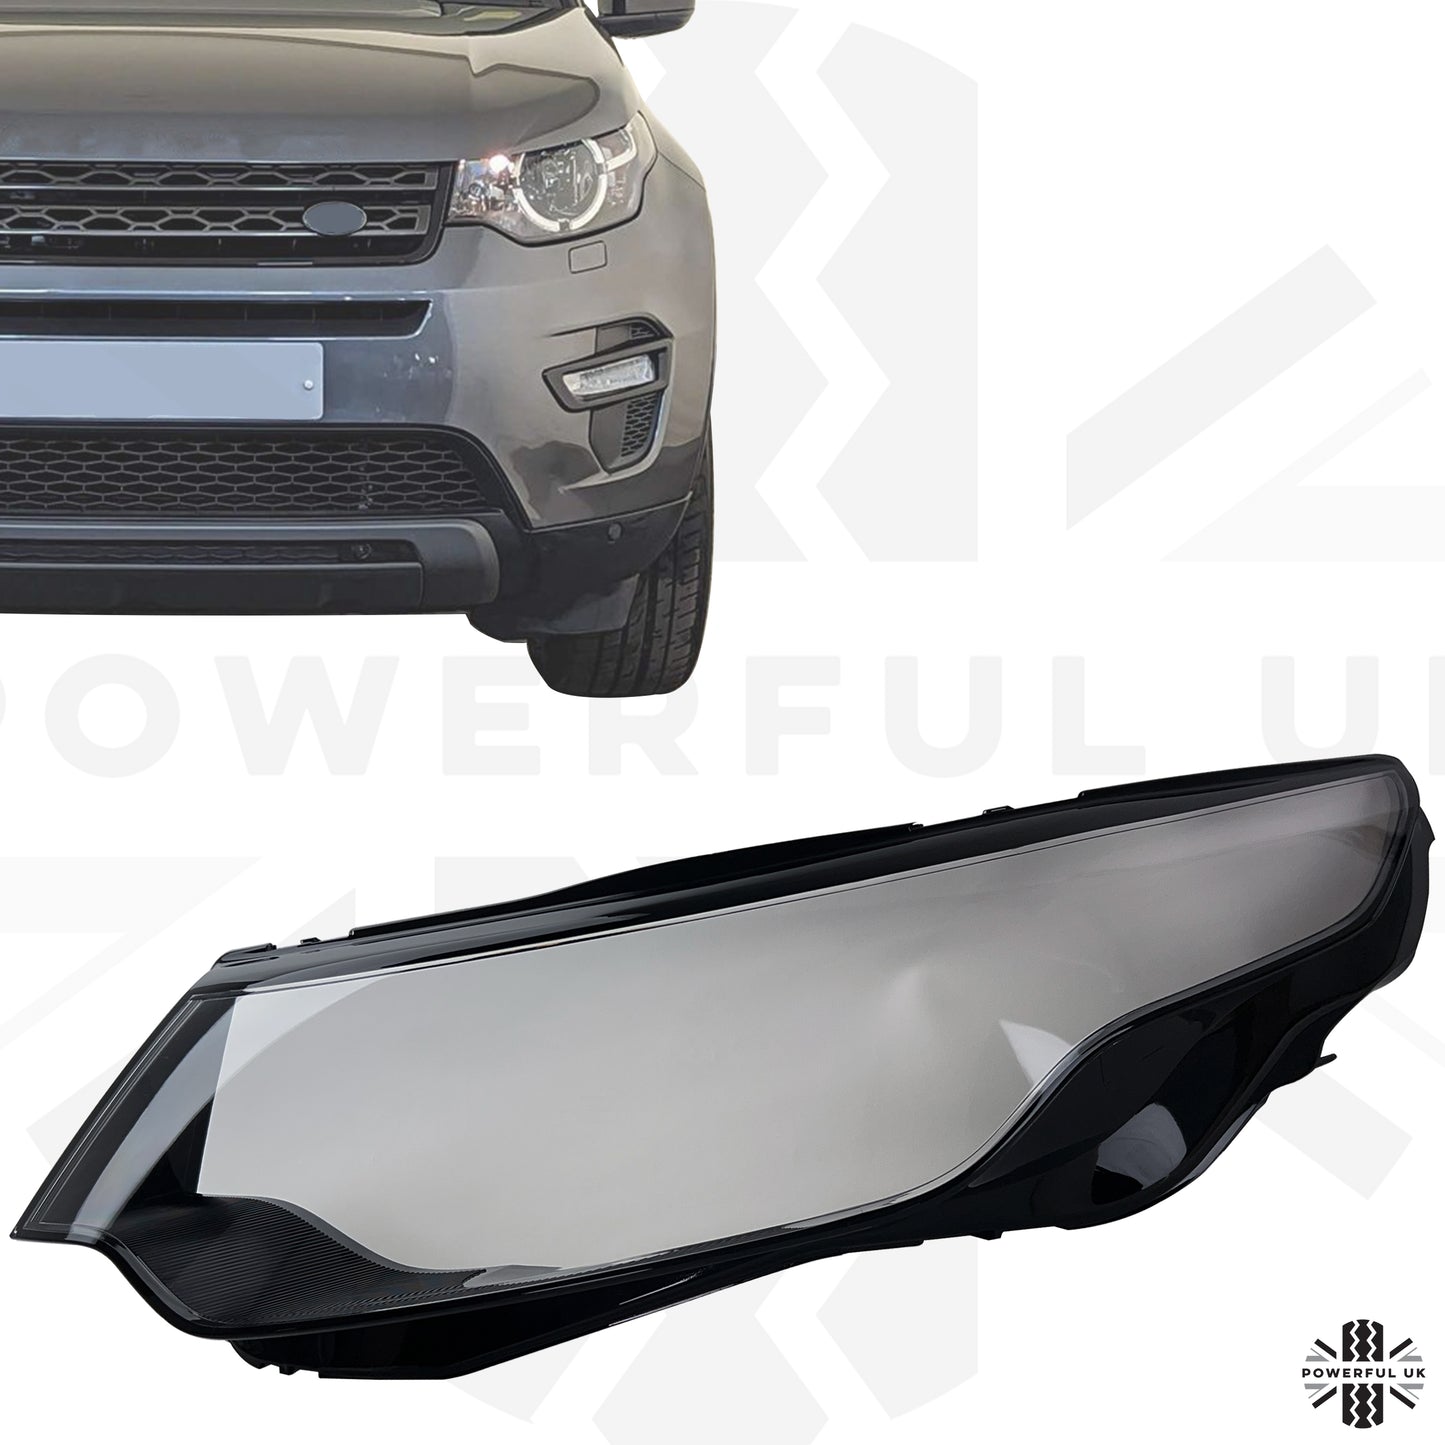 Replacement Headlight Lens for Land Rover Discovery Sport 2014-19 - LH